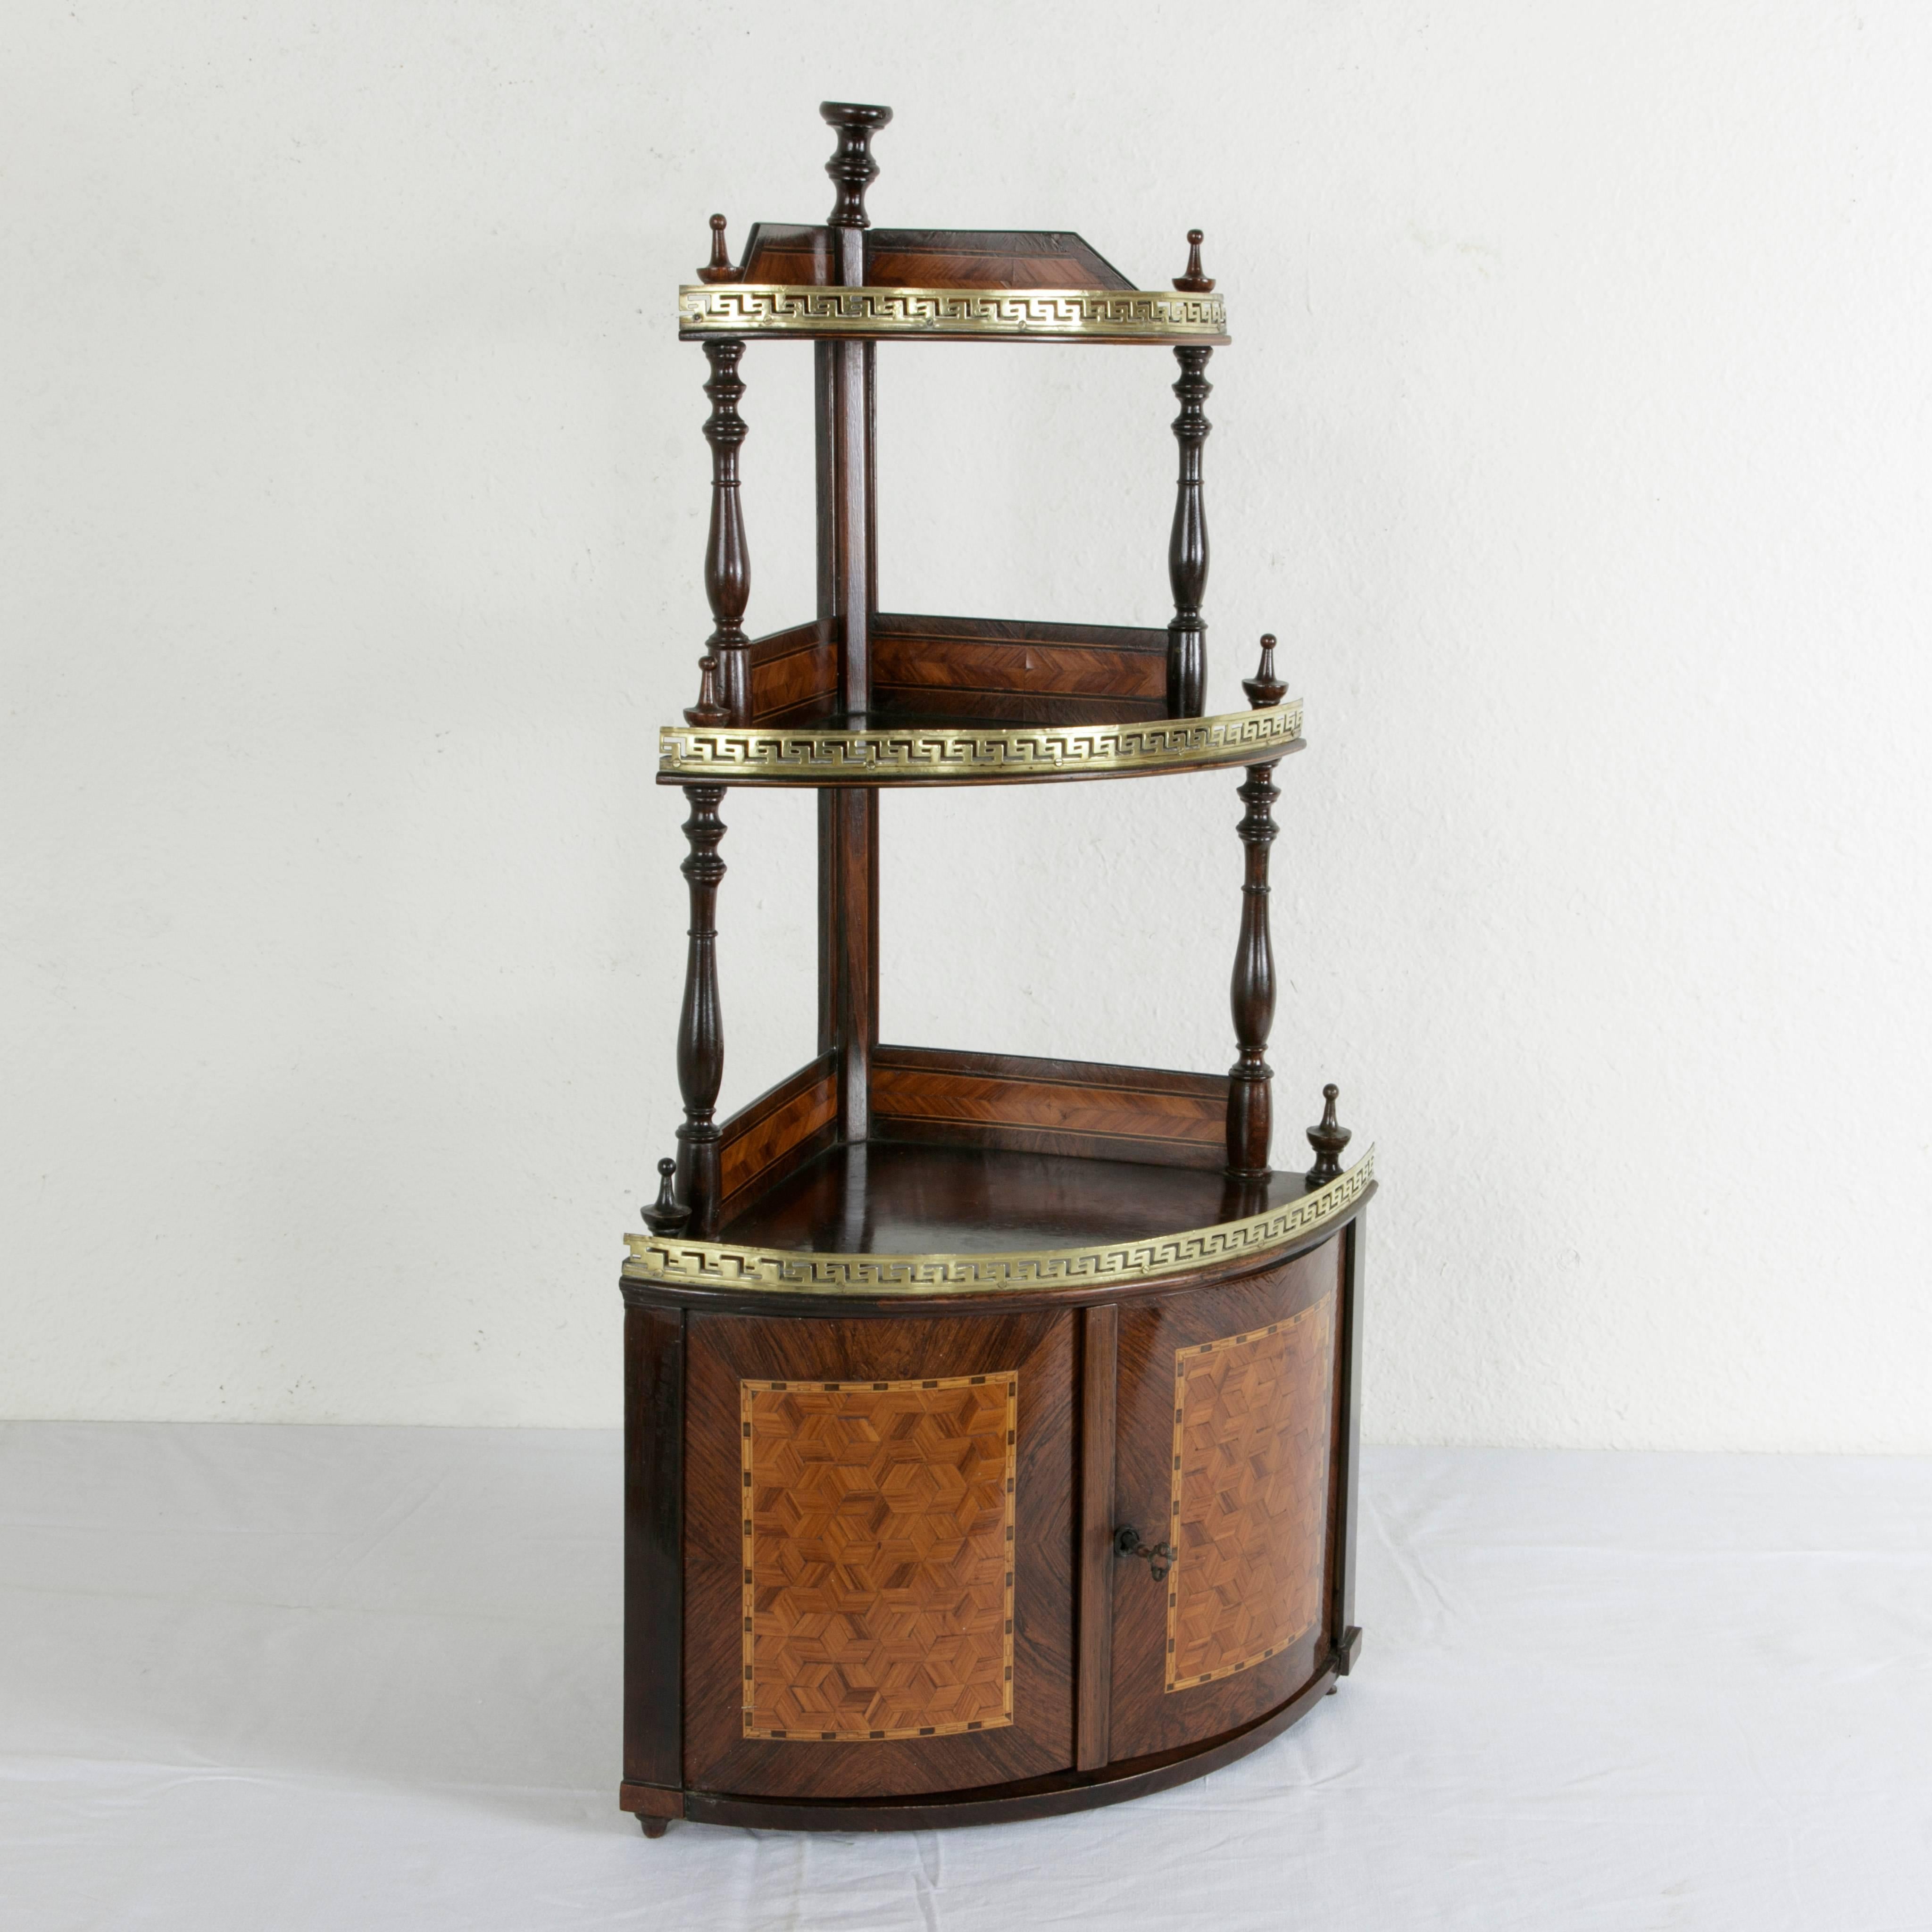 This mid-19th century French Napoleon III period marquetry corner display cabinet features a fine geometric inlay of rosewood and lemon wood inset in a palisander field. Each of the three tiers of the piece is trimmed with a pierced bronze gallery